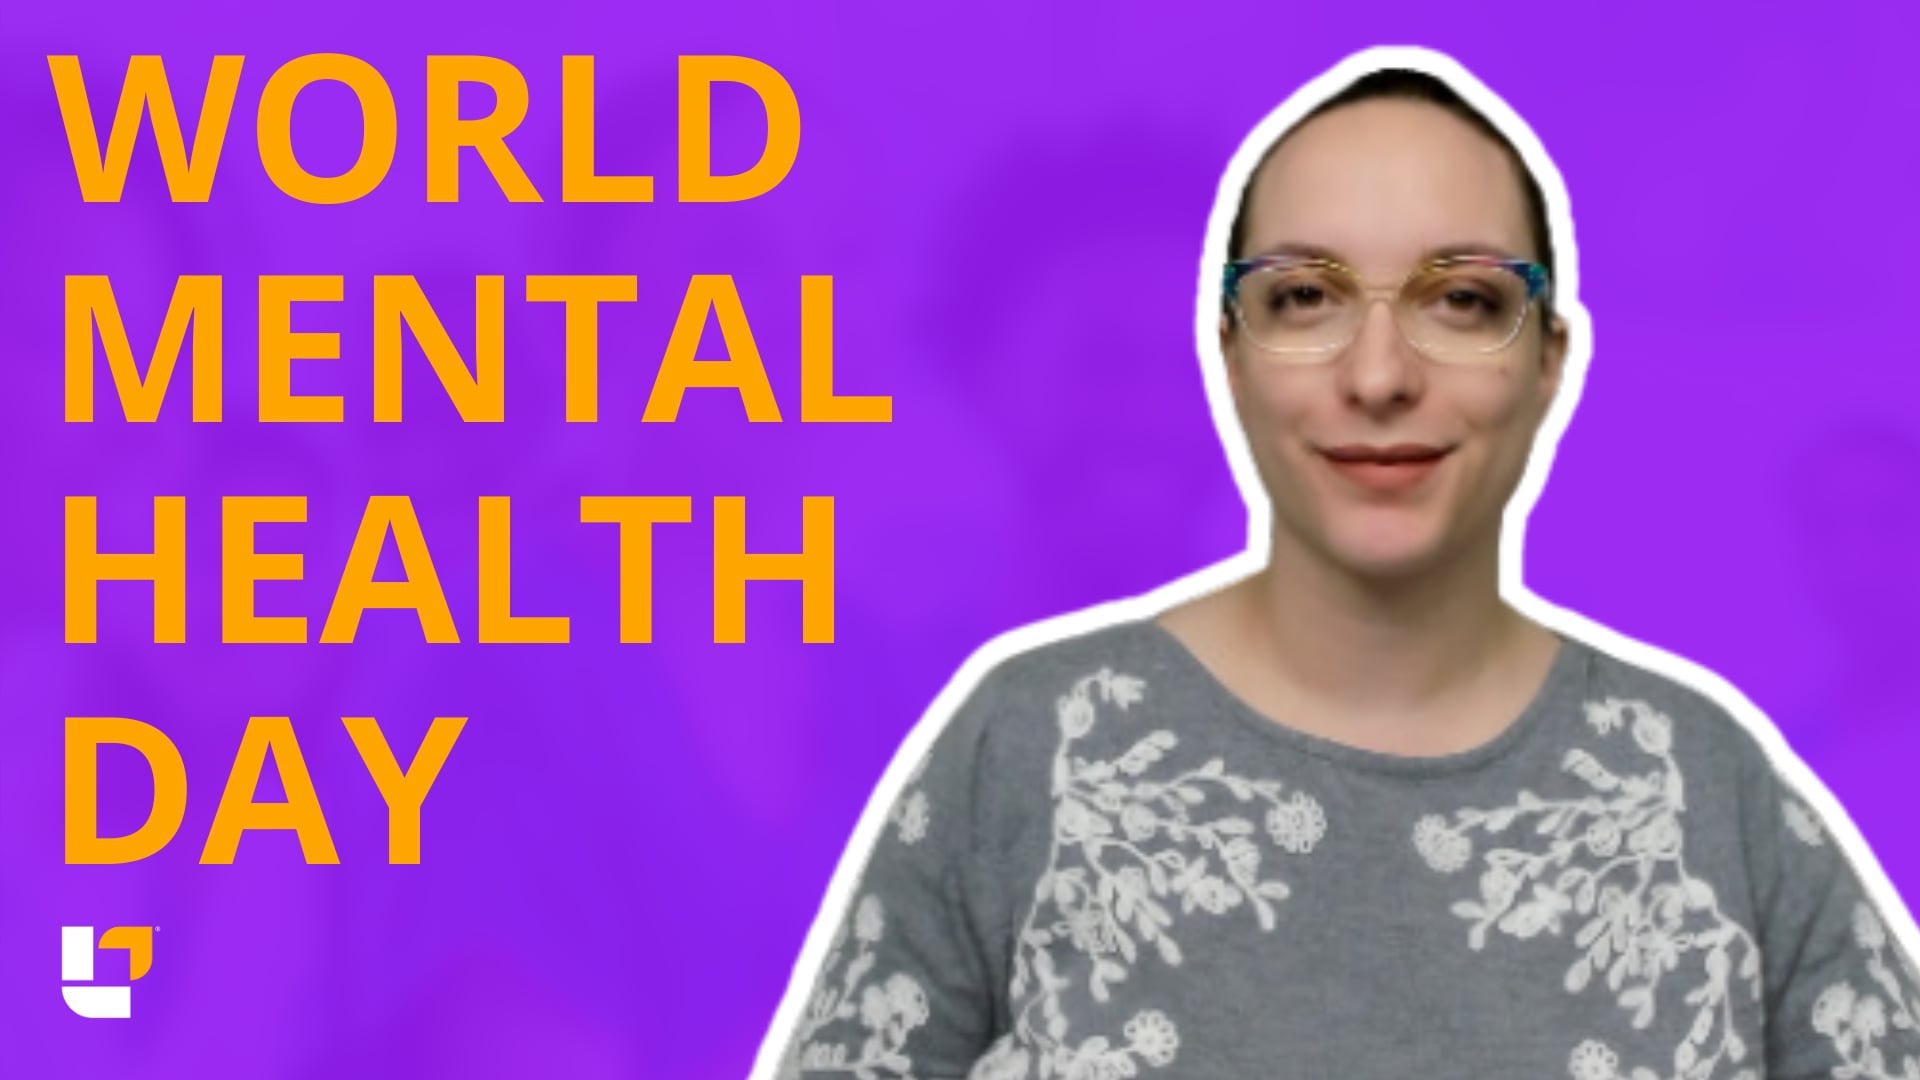 World Mental Health Day: Meris's Tips on How to Deal When You're Struggling - LevelUpRN